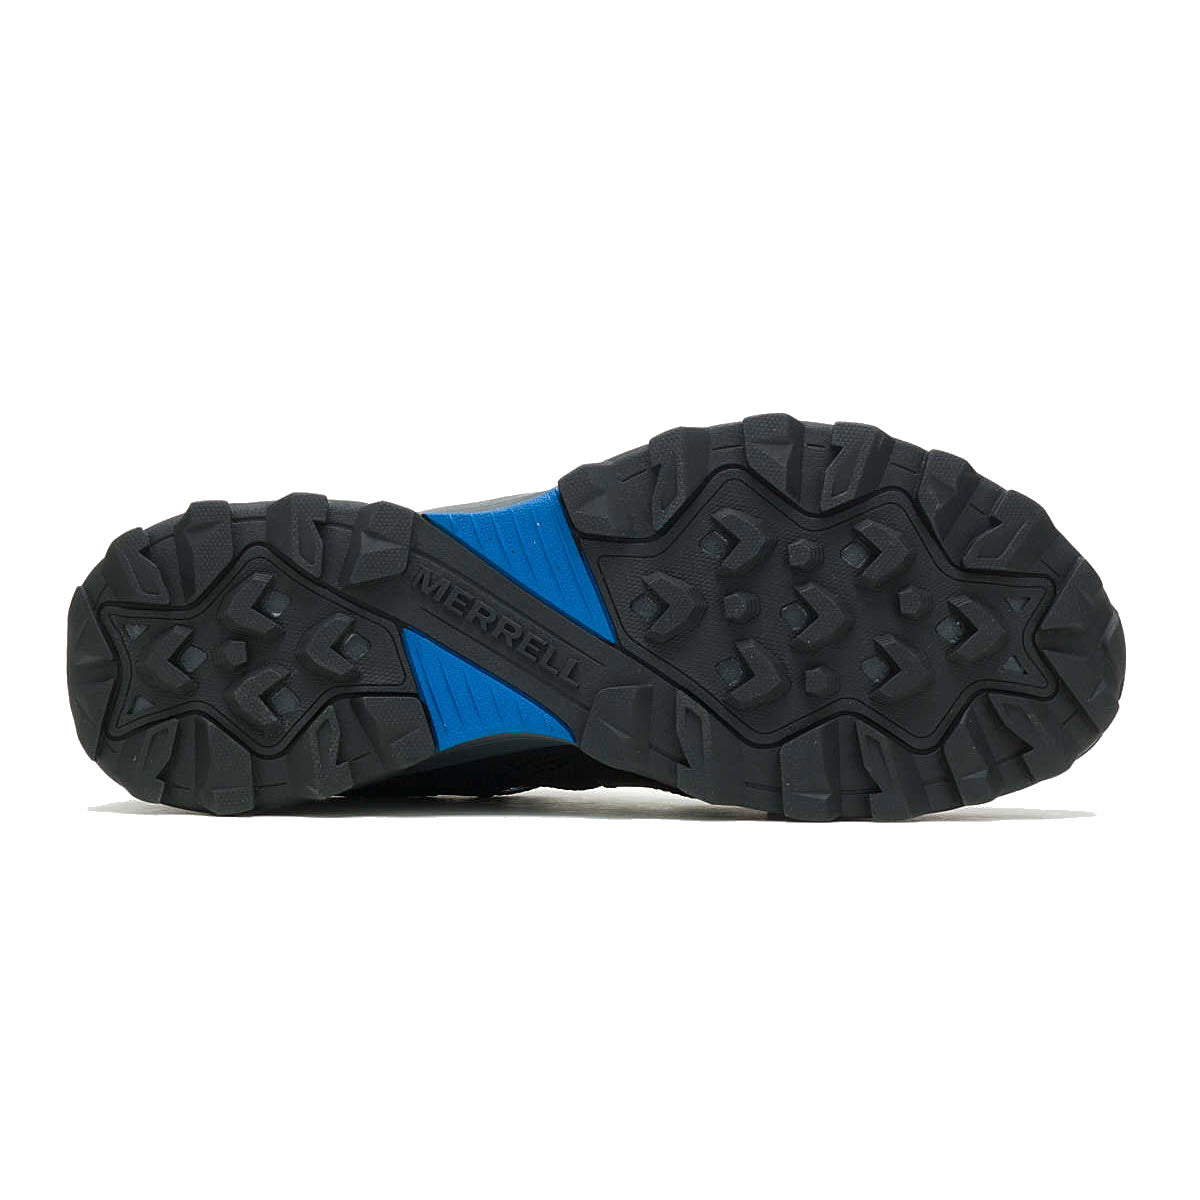 Bottom view of a Merrell SPEED STRIKE LEATHER SIEVE SLATE NAVY - MENS hiking shoe showcasing the black trail outsole with a blue accent.